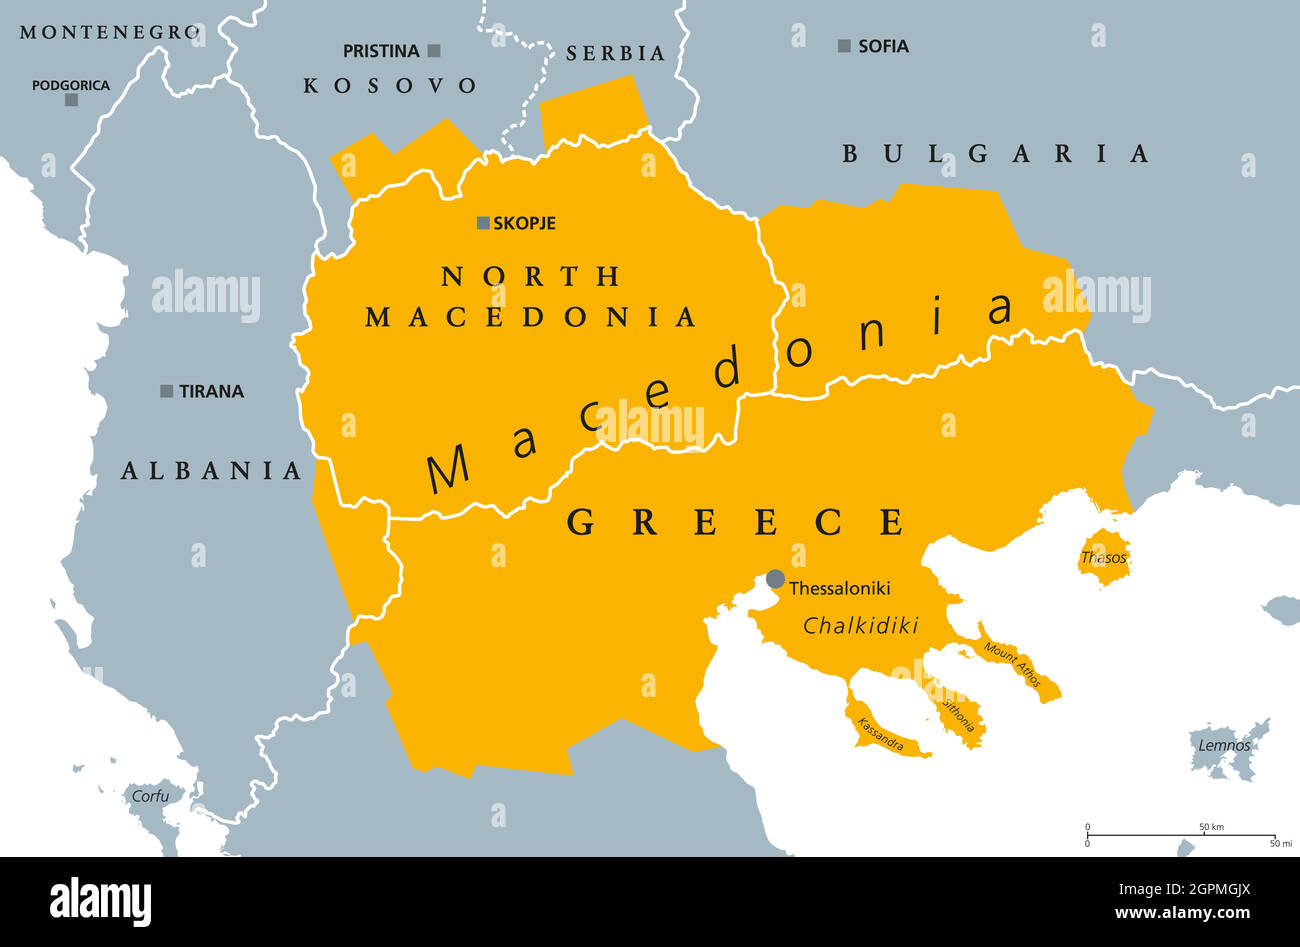 Geographical region of Macedonia, political map Stock Vector